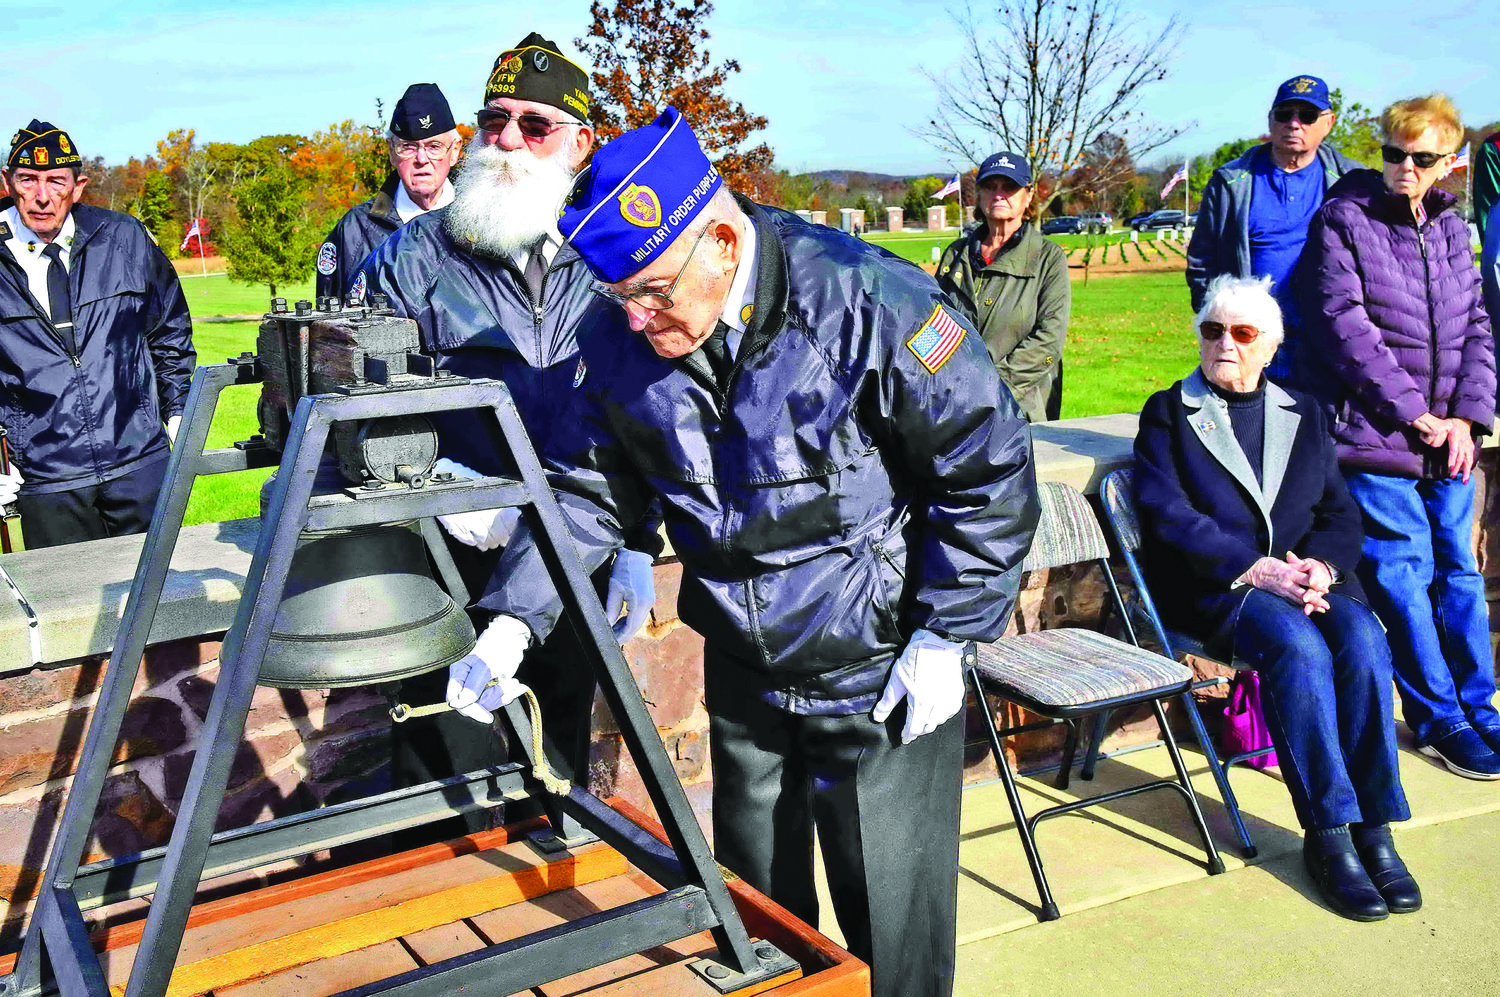 November: At Washington Crossing National Cemetery’s Veterans Day Ceremony, World War II veteran Salvador Castro, 96, rings the bell commemorating all who gave up their lives fighting for this country in all wars.